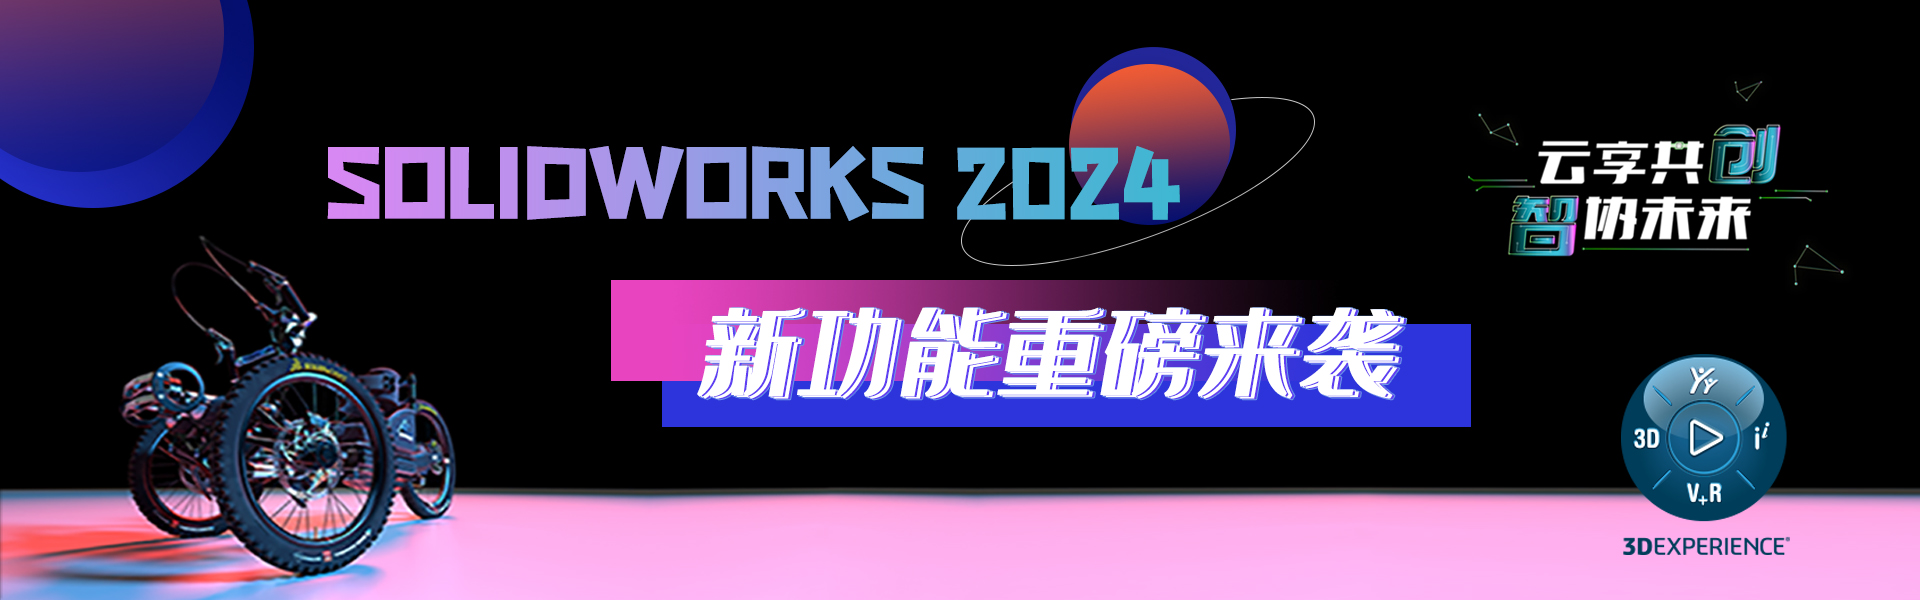 solidworks2024